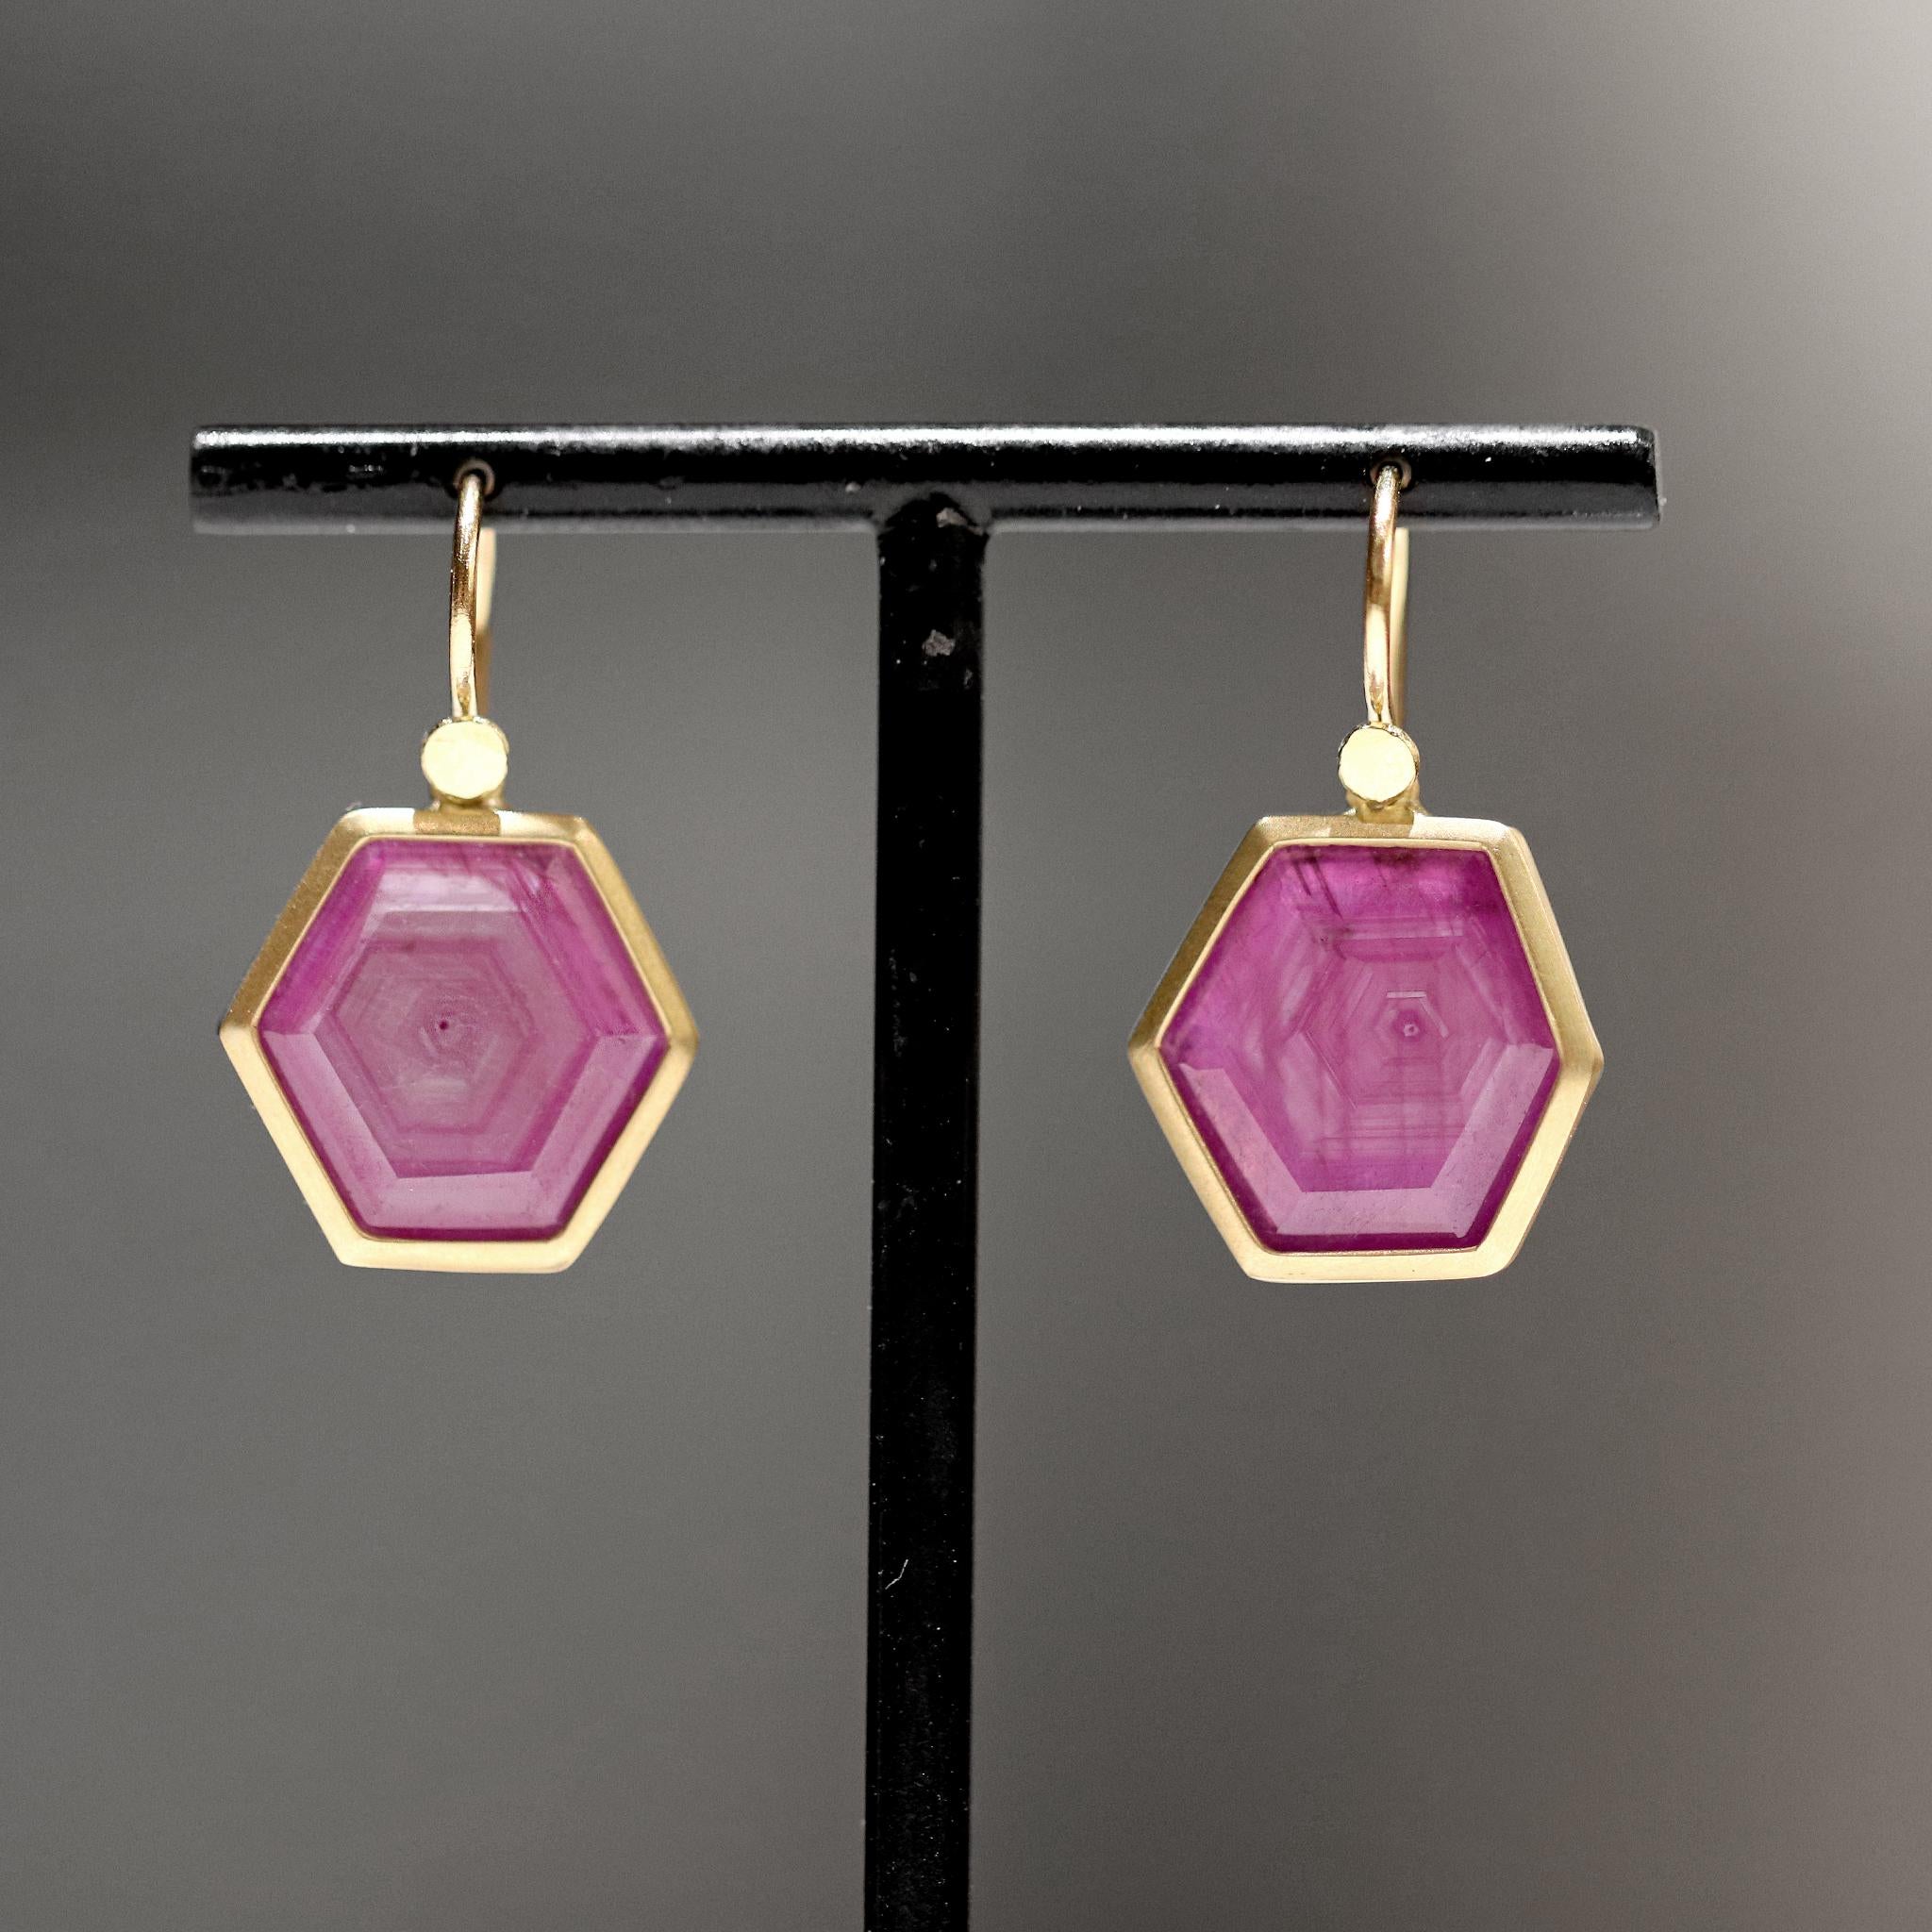 One of a Kind Drop Earrings hand-fabricated by jewelry maker Lola Brooks showcasing a stunning matched pair of natural glowing rubies that feature the hexagonal crystal growth formation only visible in completely natural stones. The gems weigh a